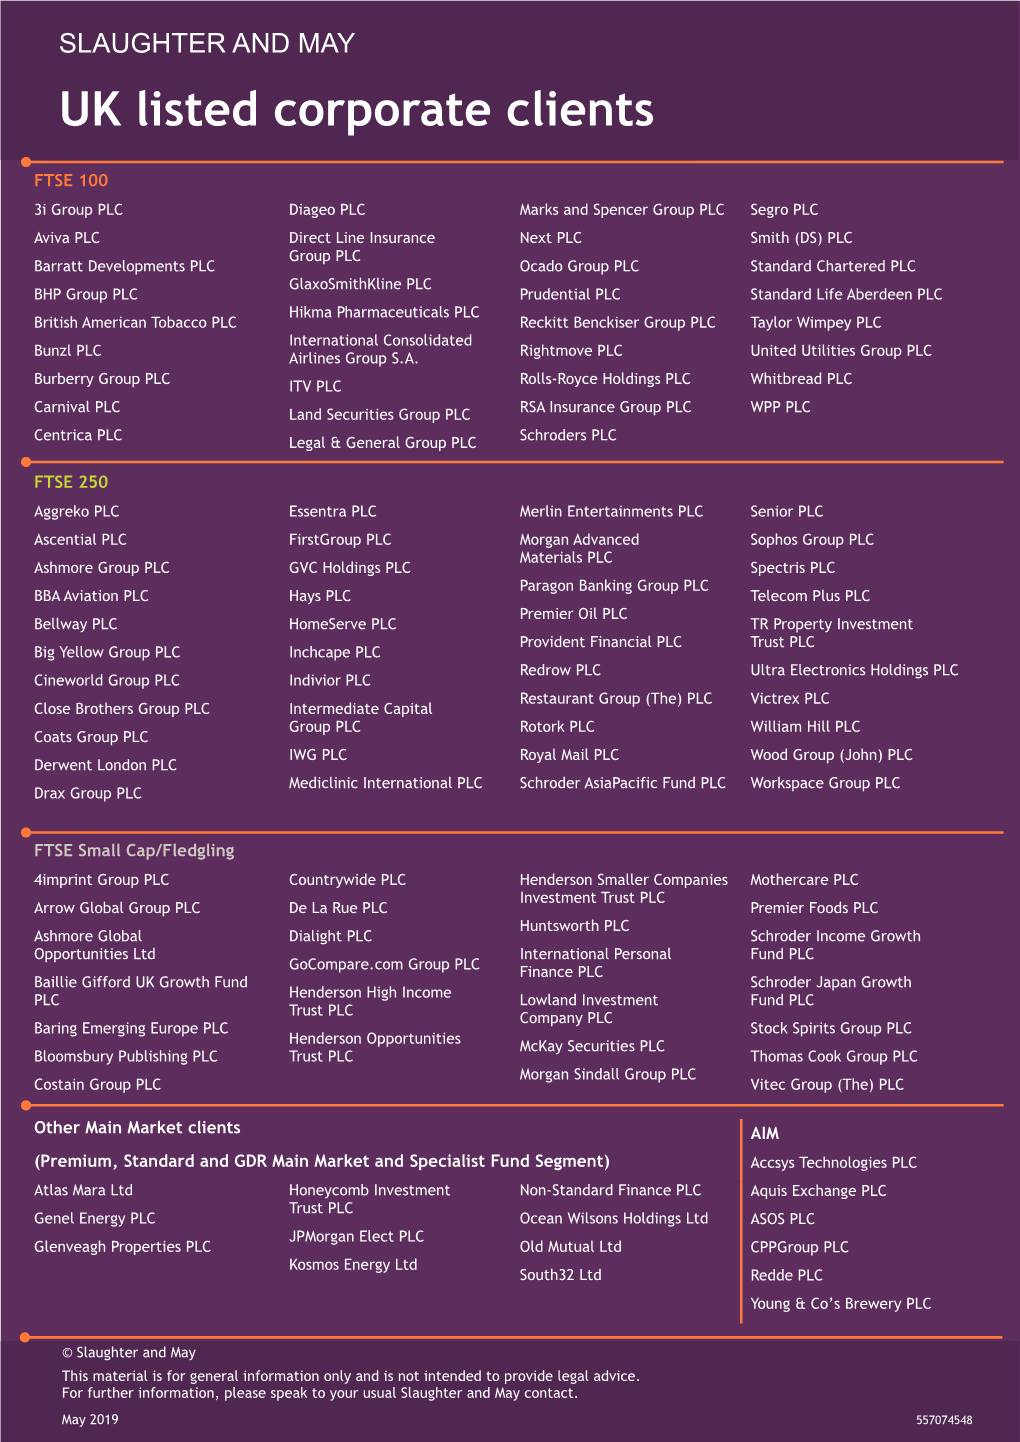 UK Listed Corporate Clients